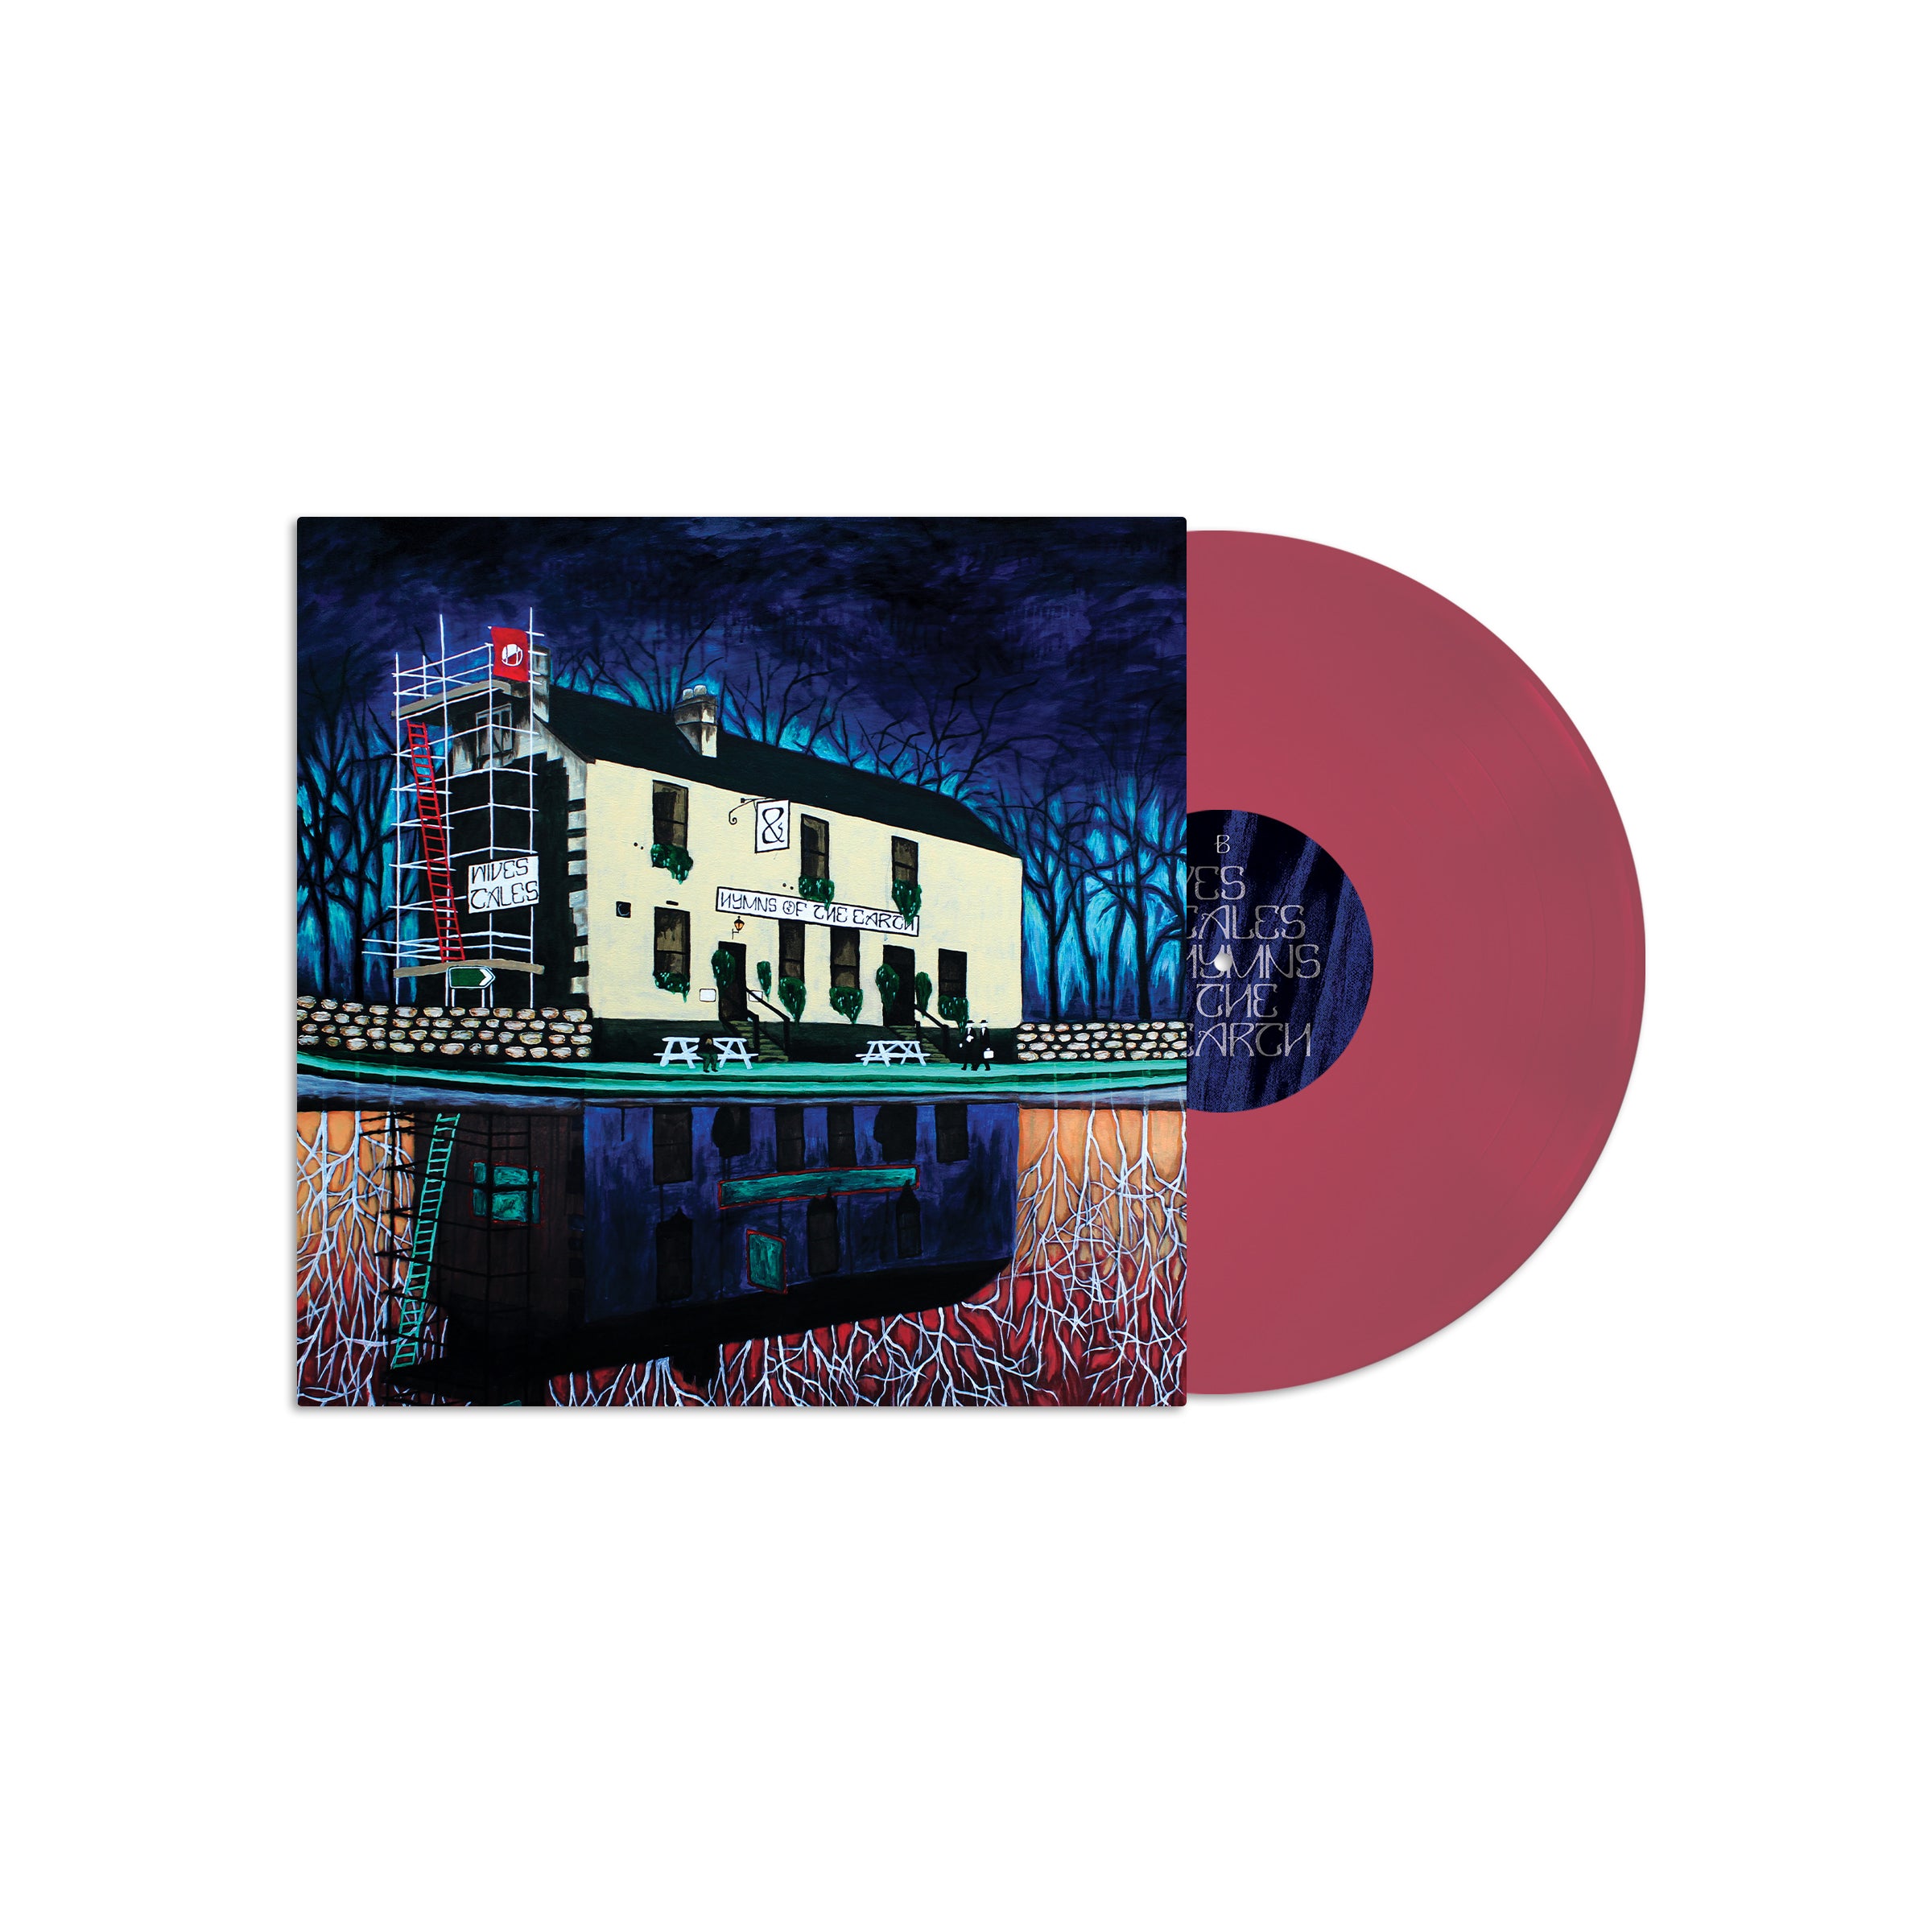 Porchlight - Wives Tales & Hymns of the Earth: Transparent Purple Vinyl EP